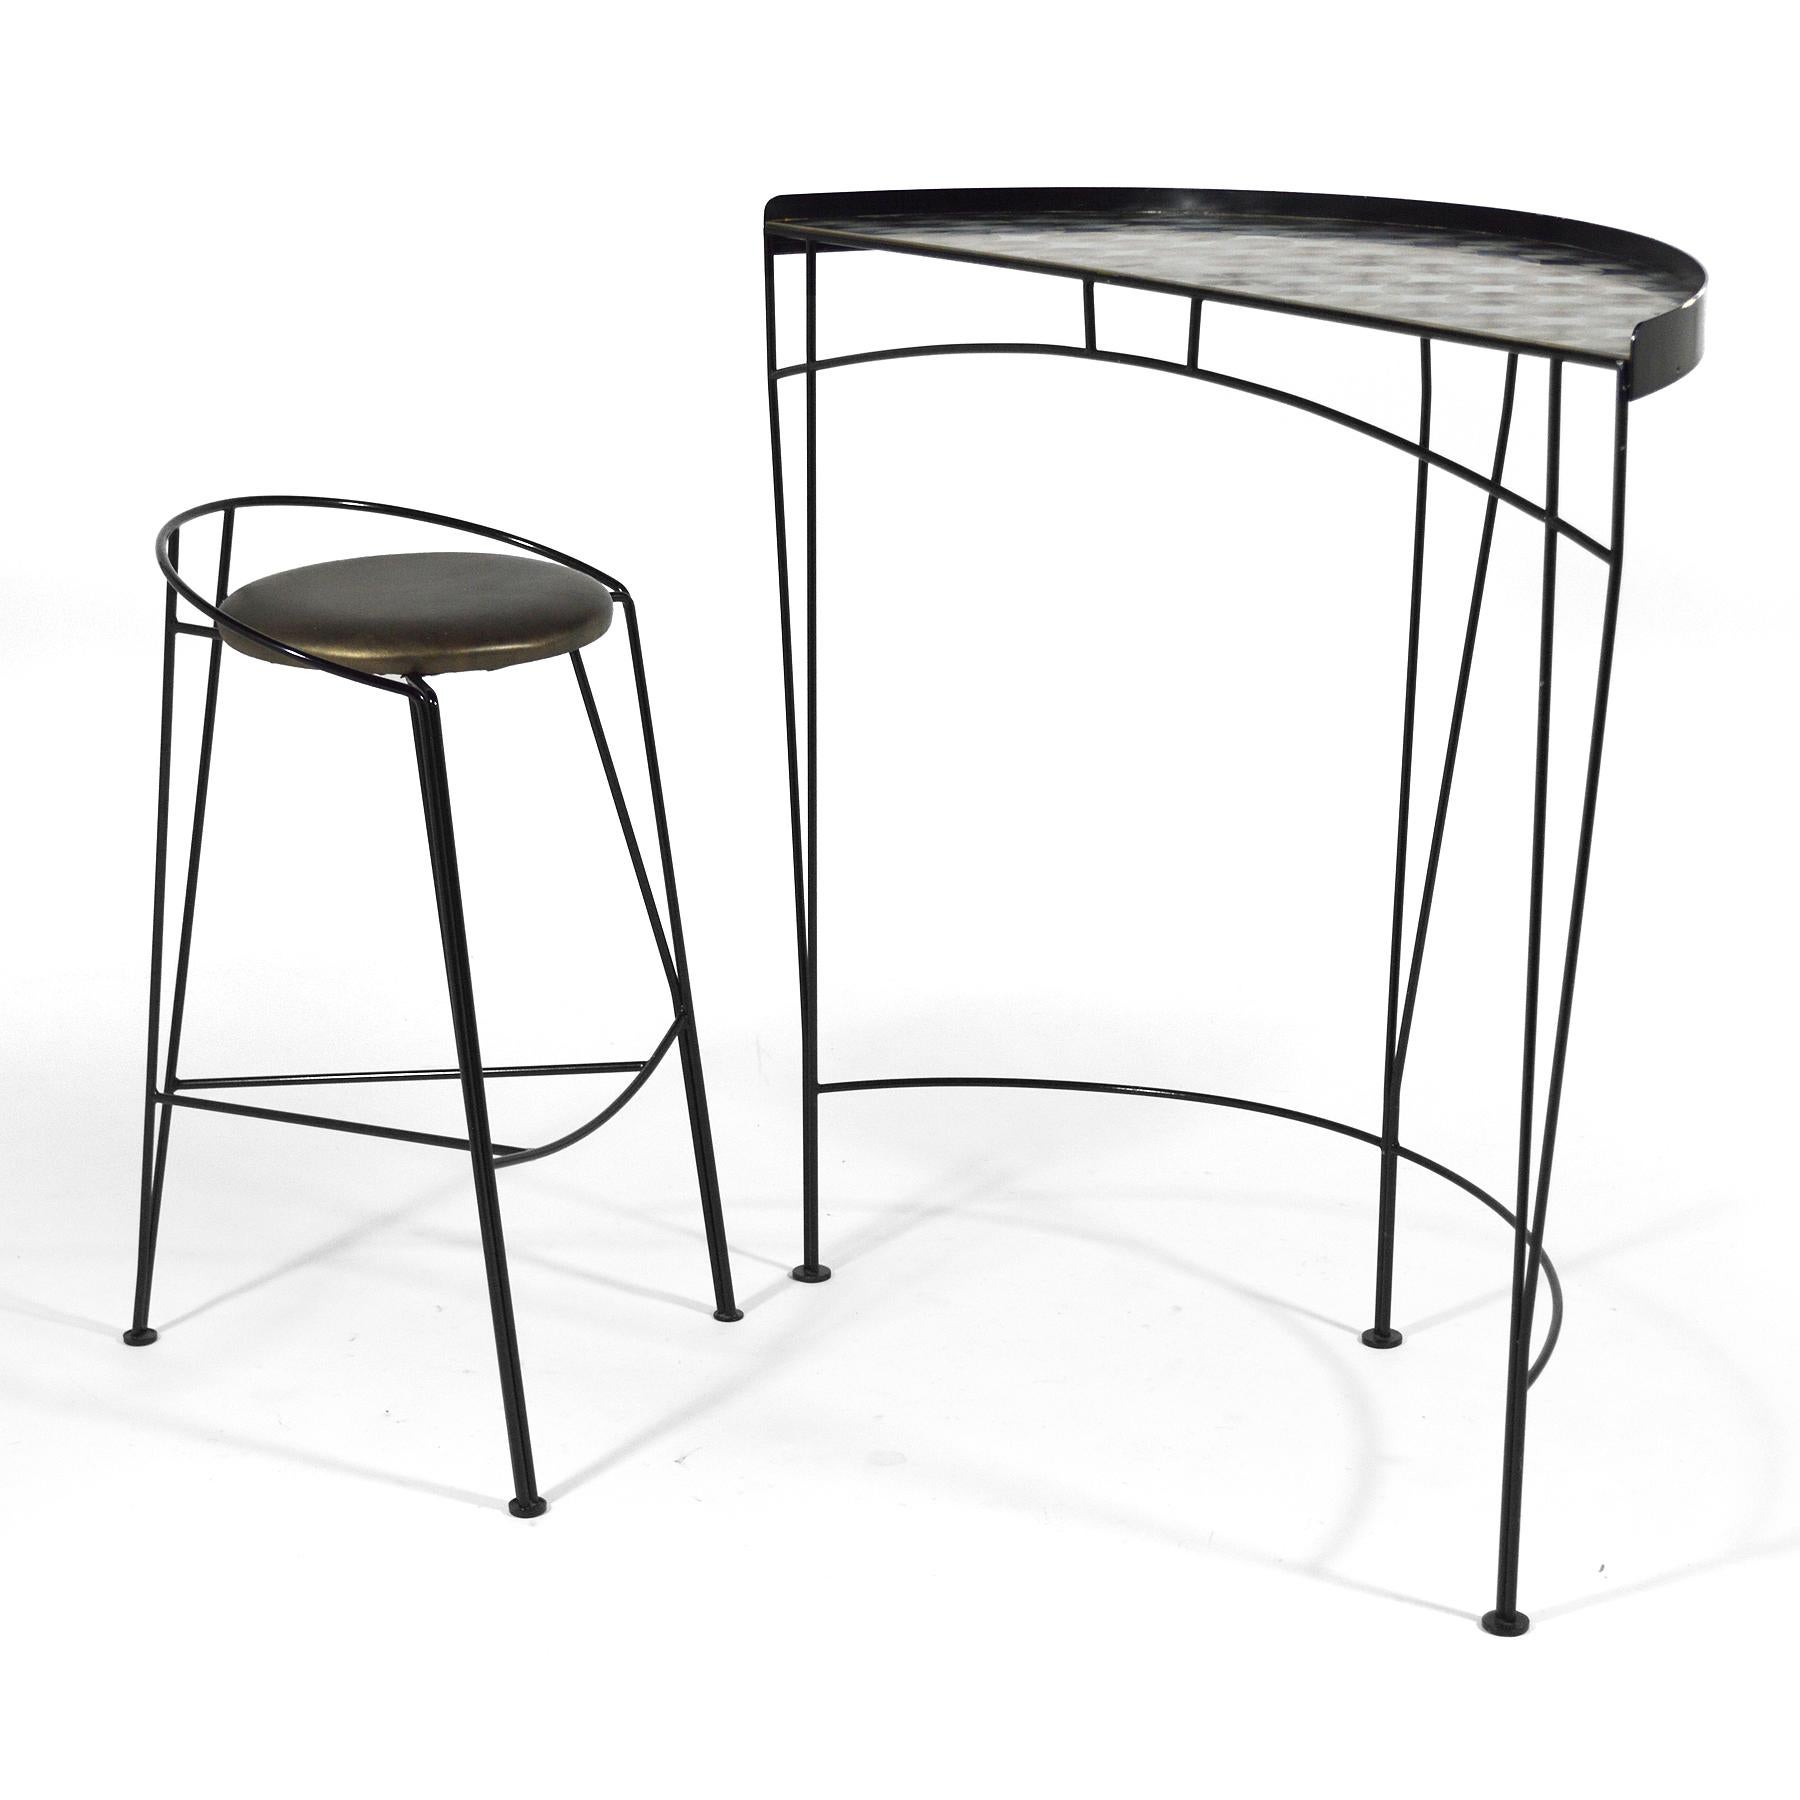 This terrific post-modern design by Vecta uses wire rod for a strong graphic quality. It features a semi-circular table with a machined steel top paired with a three-legged stool. It serves beautifully as a small desk, perfect for someone working on